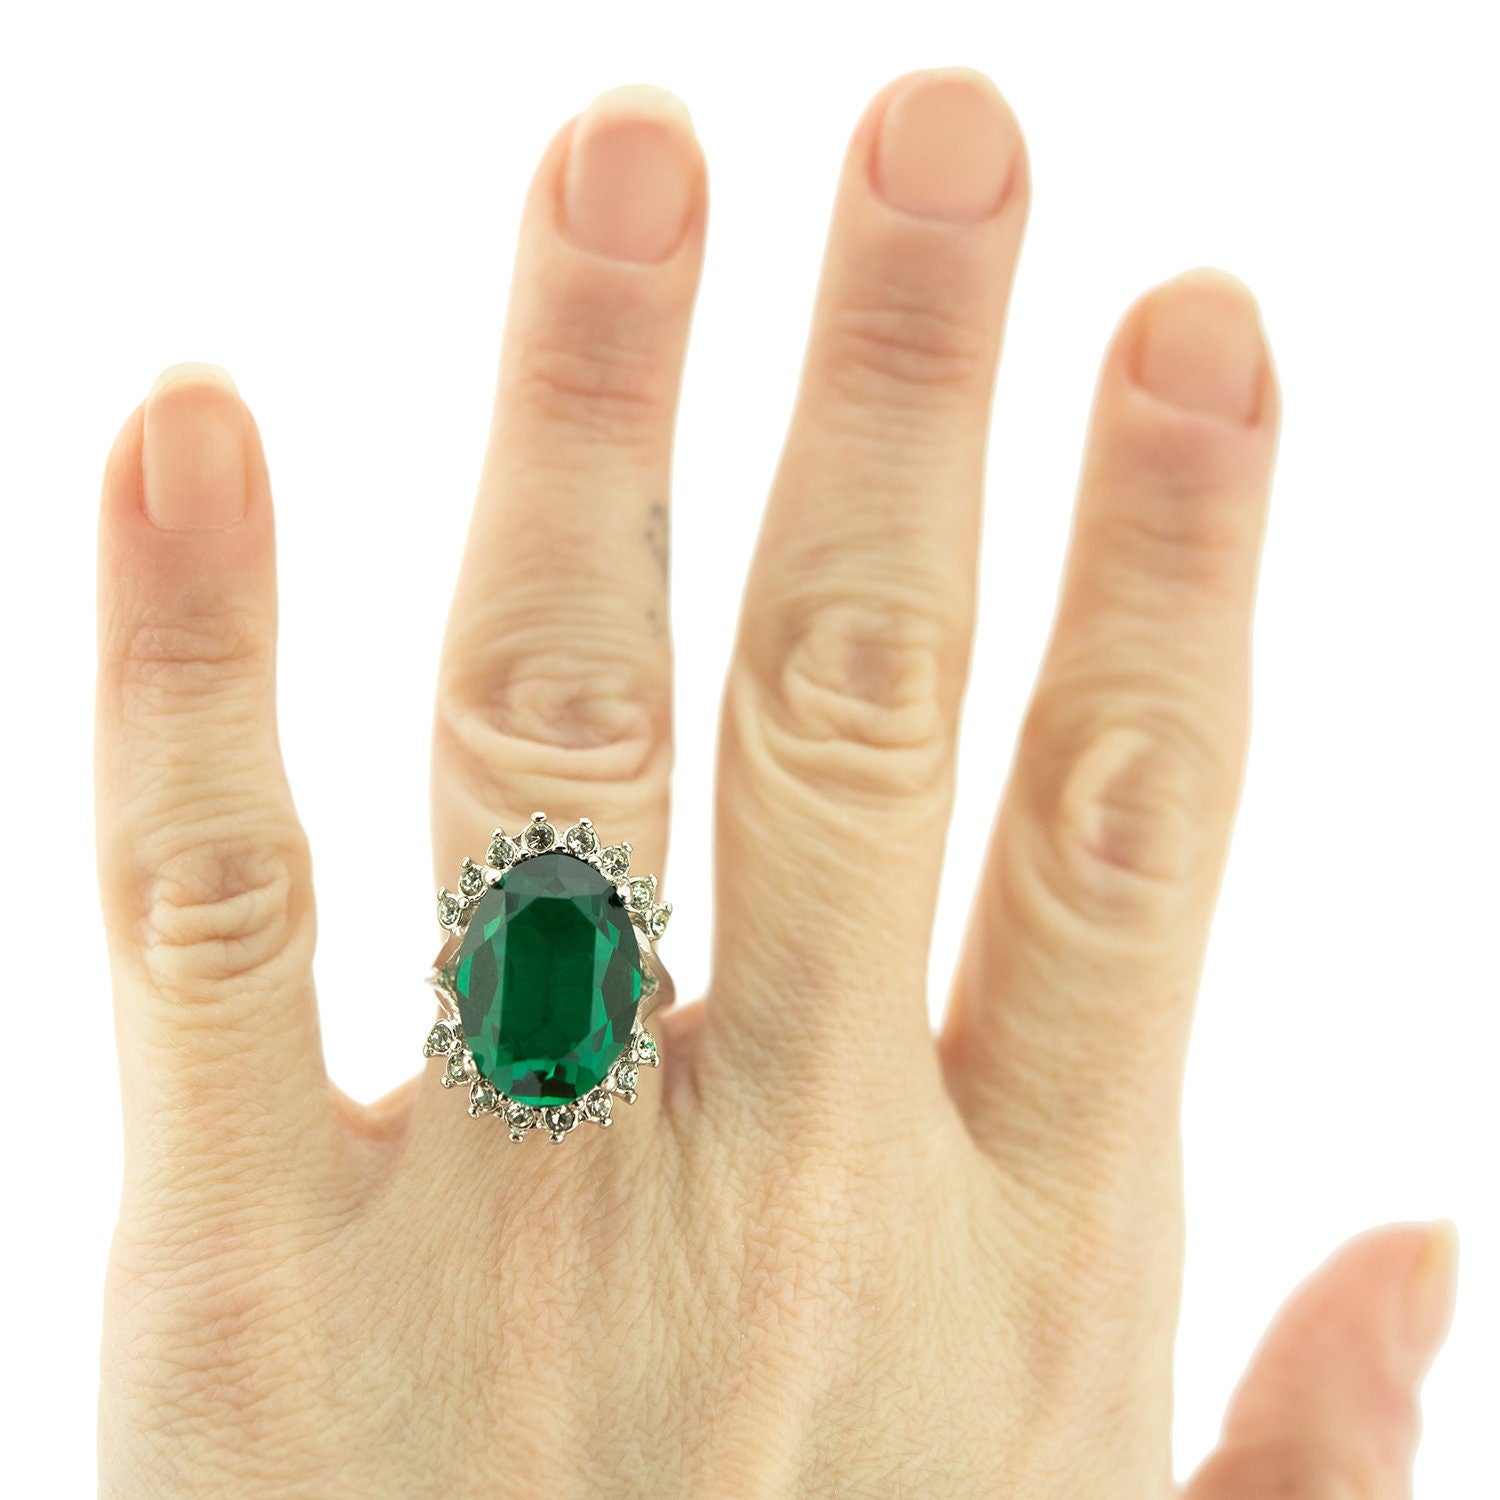 Vintage Ring Emerald Clear Swarovski Crystal Ring 18k White Gold Silver Antique Womans Handmade Jewlery R1909 - Limited Stock - Never Worn